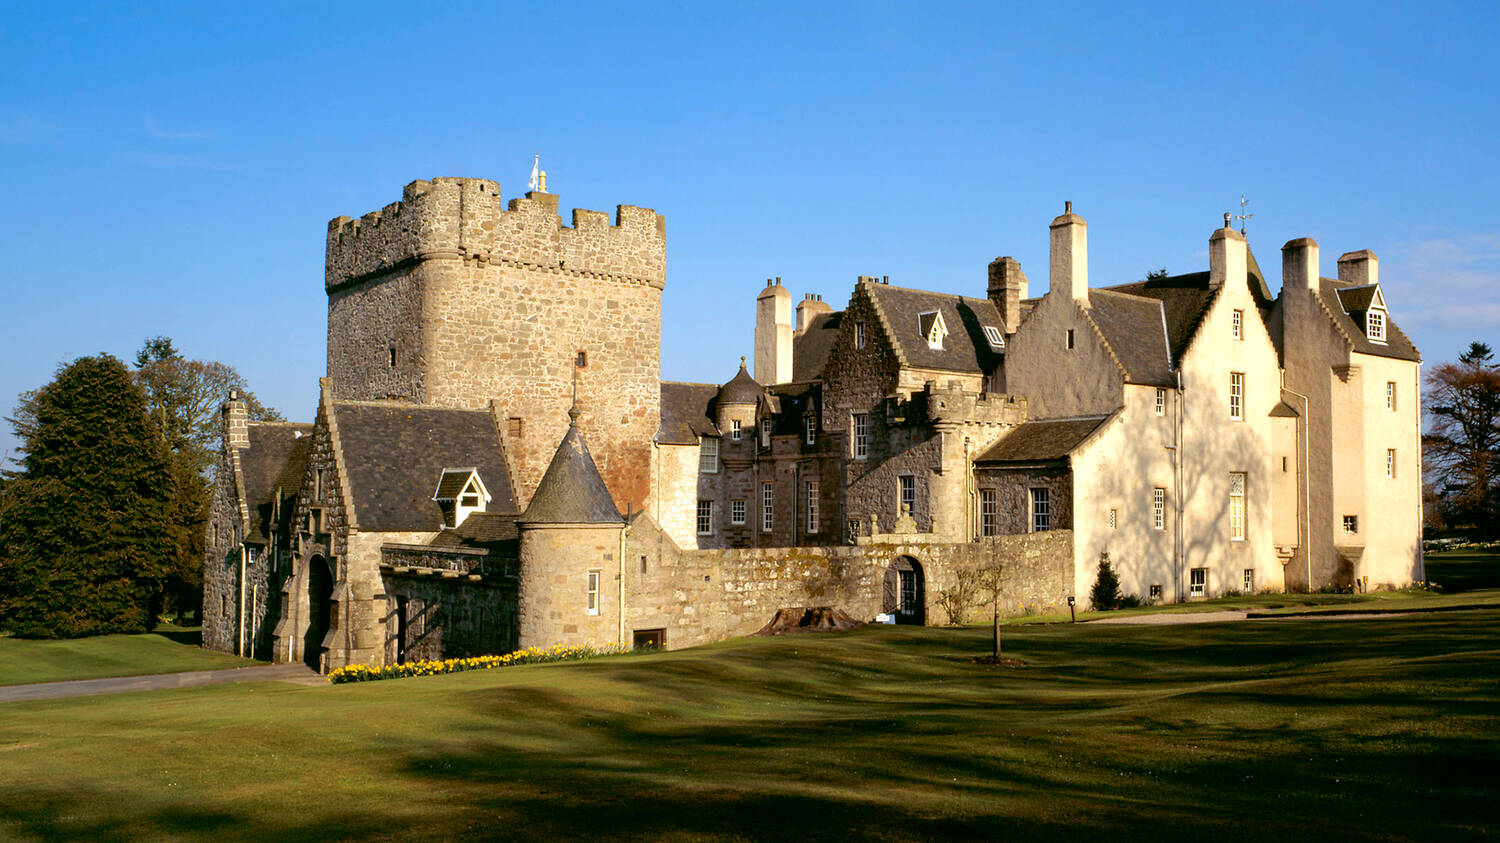 A view of Drum Castle on a sunny day, with bright blue sky behind. The ancient, square stone tower is to the left, with the Jacobean section to the right. Tall trees can be seen behind the castle.